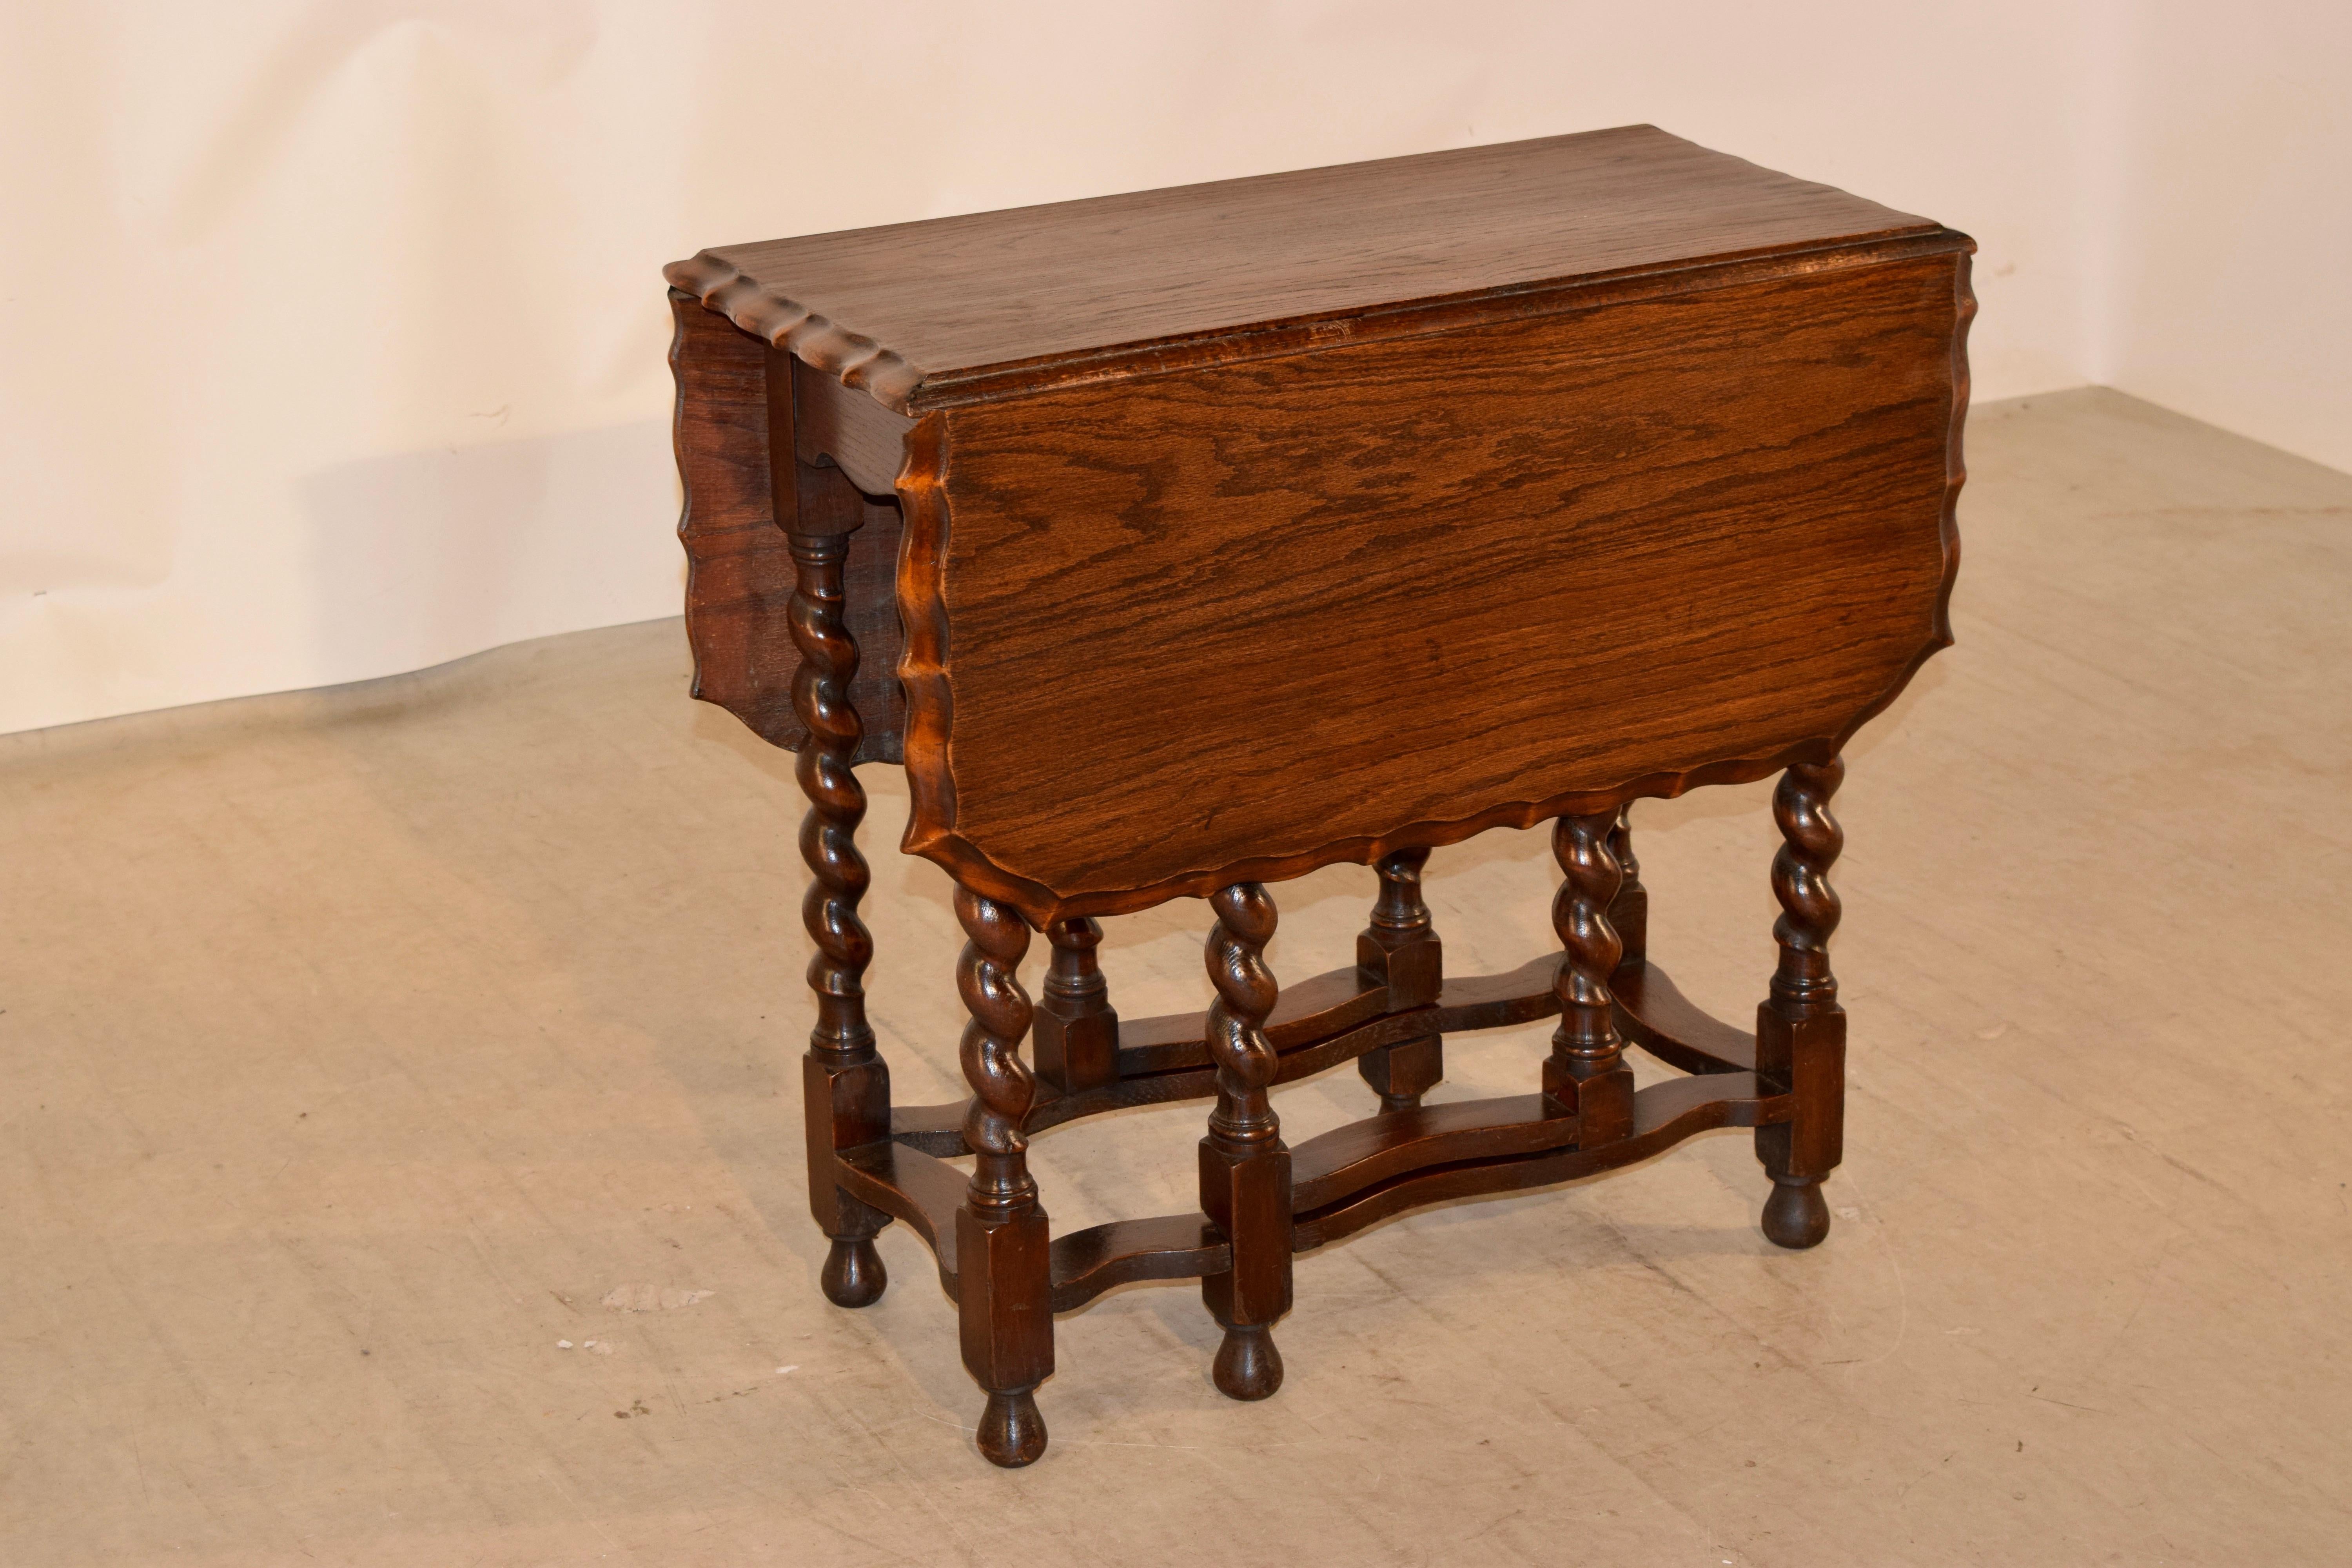 Late 19th century English oak gate leg table with a beautifully scalloped and beveled edge around the top following down to a simple apron and supported on hand-turned barley twist legs. The legs are joined by serpentined stretchers and supported on